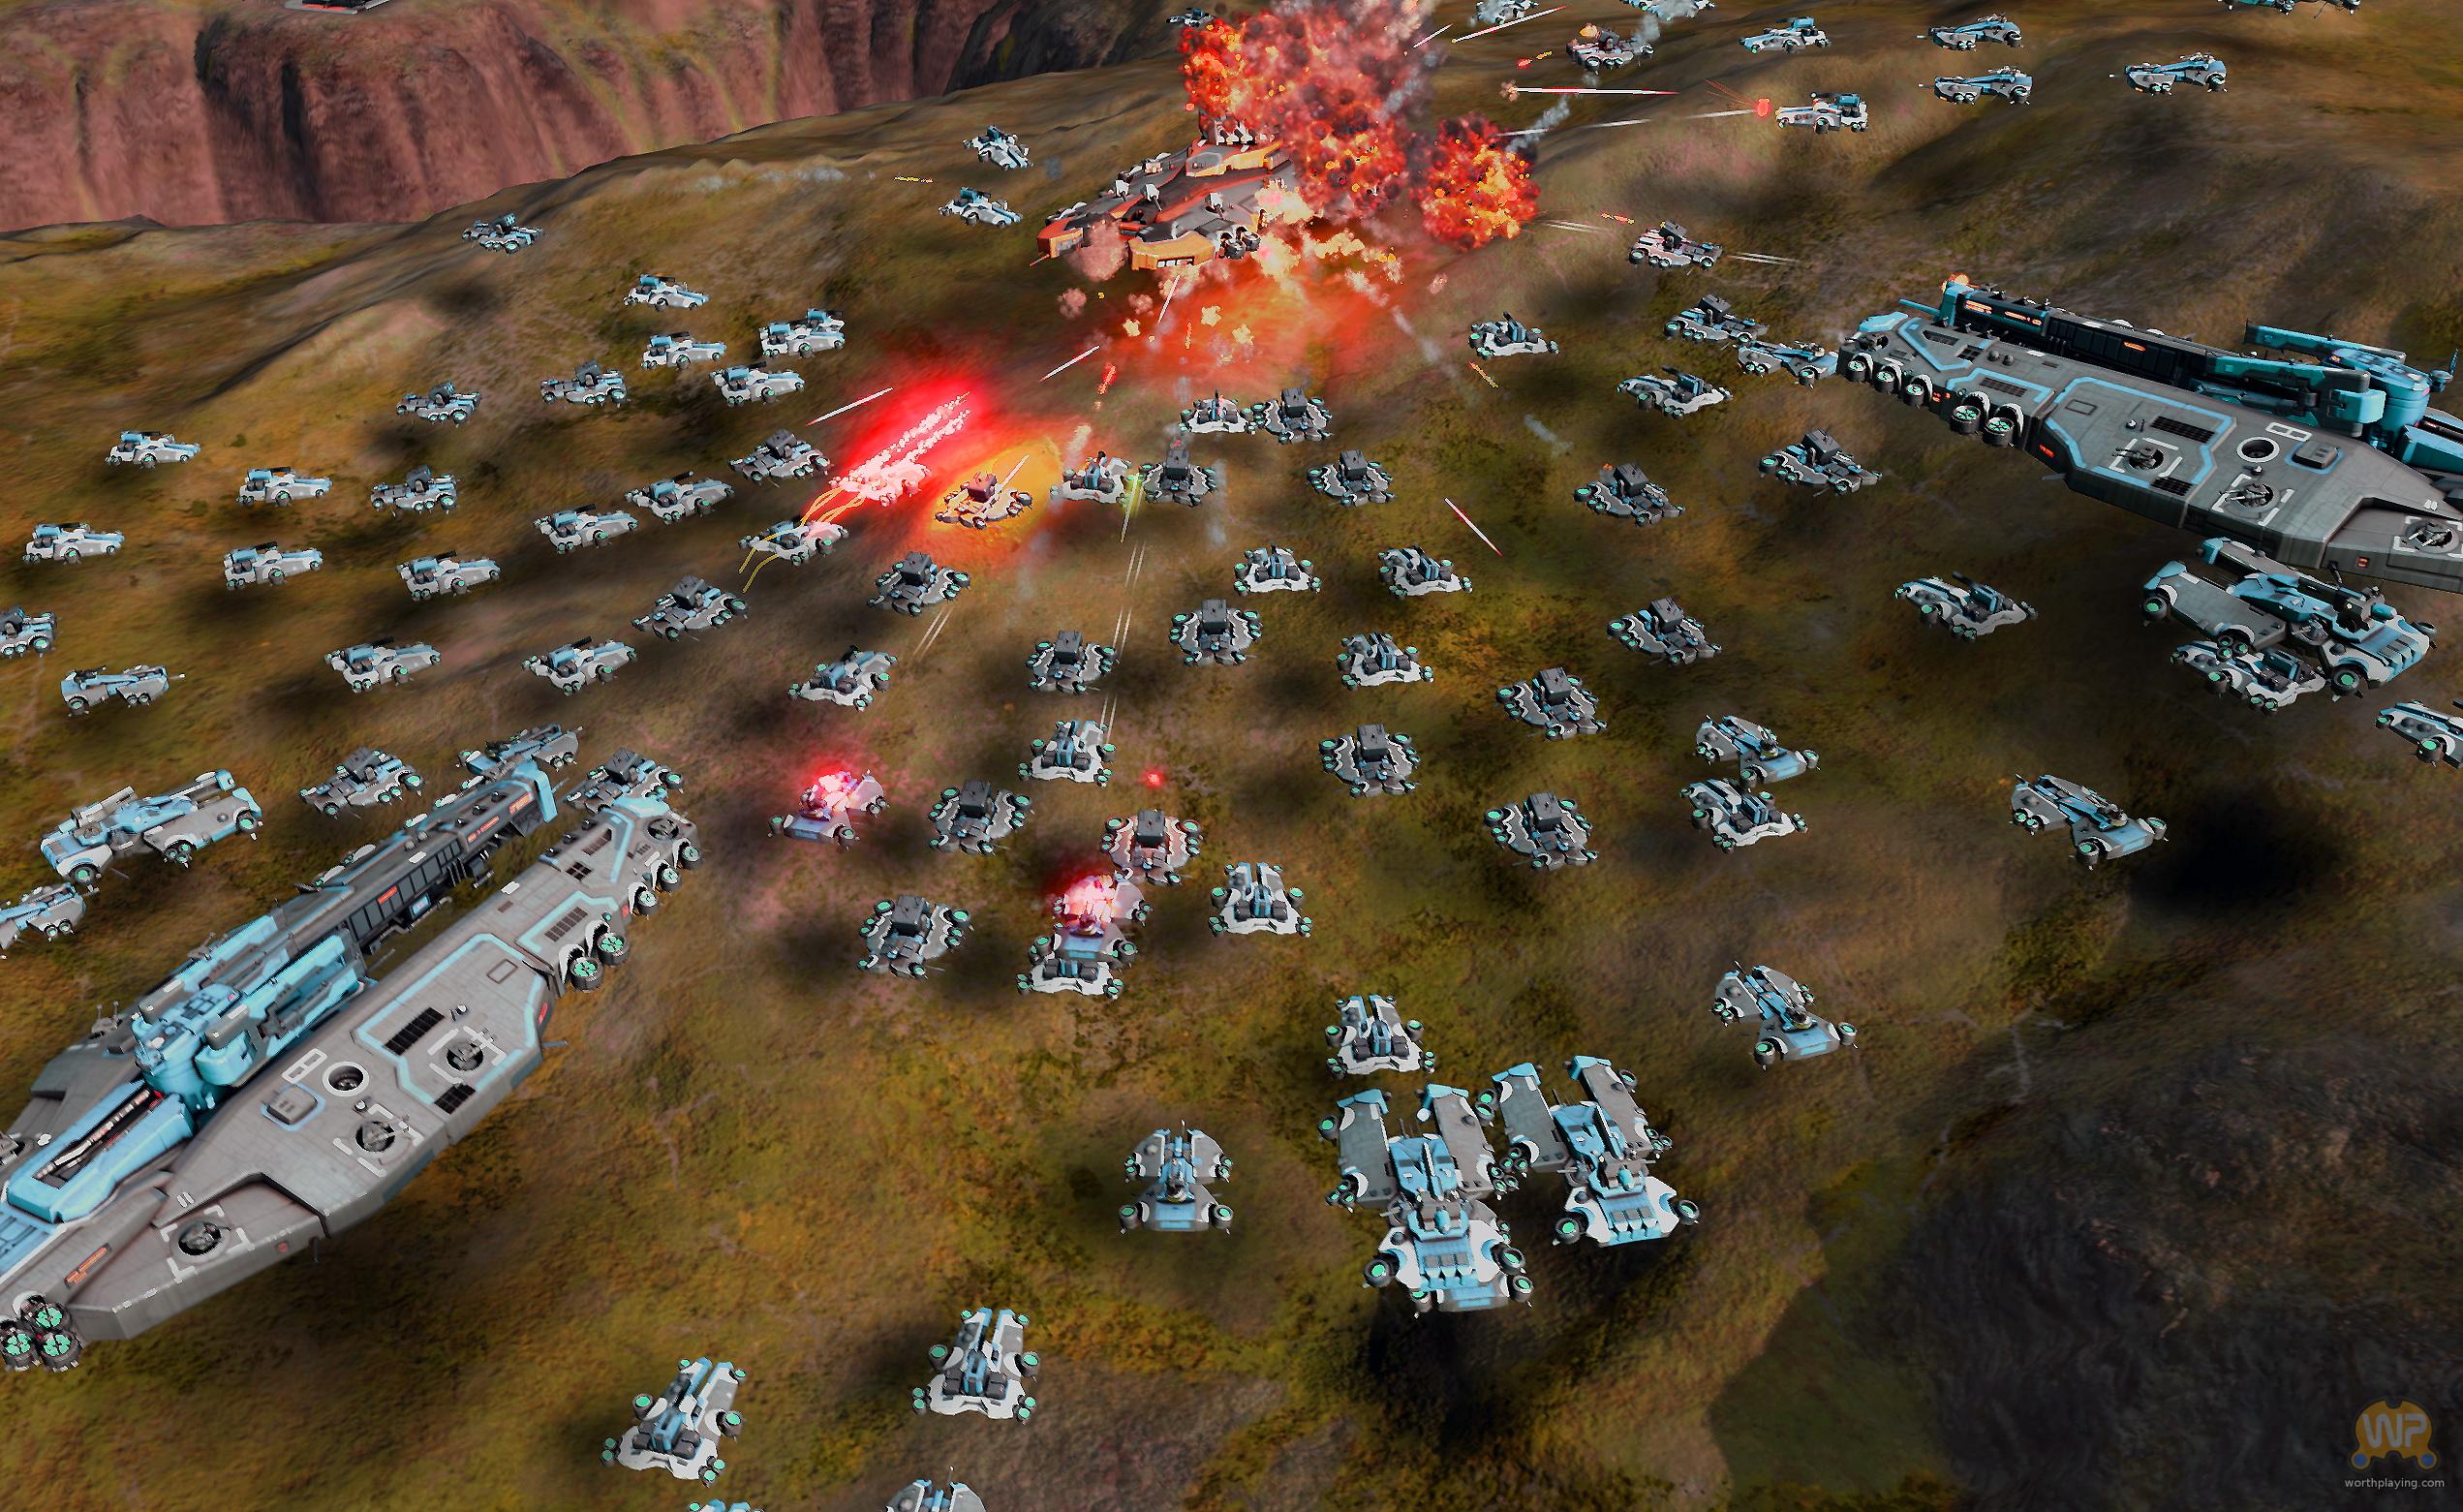 Стратегии снг. Ashes of the Singularity. Игру Ashes of the Singularity. RTS 2000 годов. RTS игр (real-time Strategy).